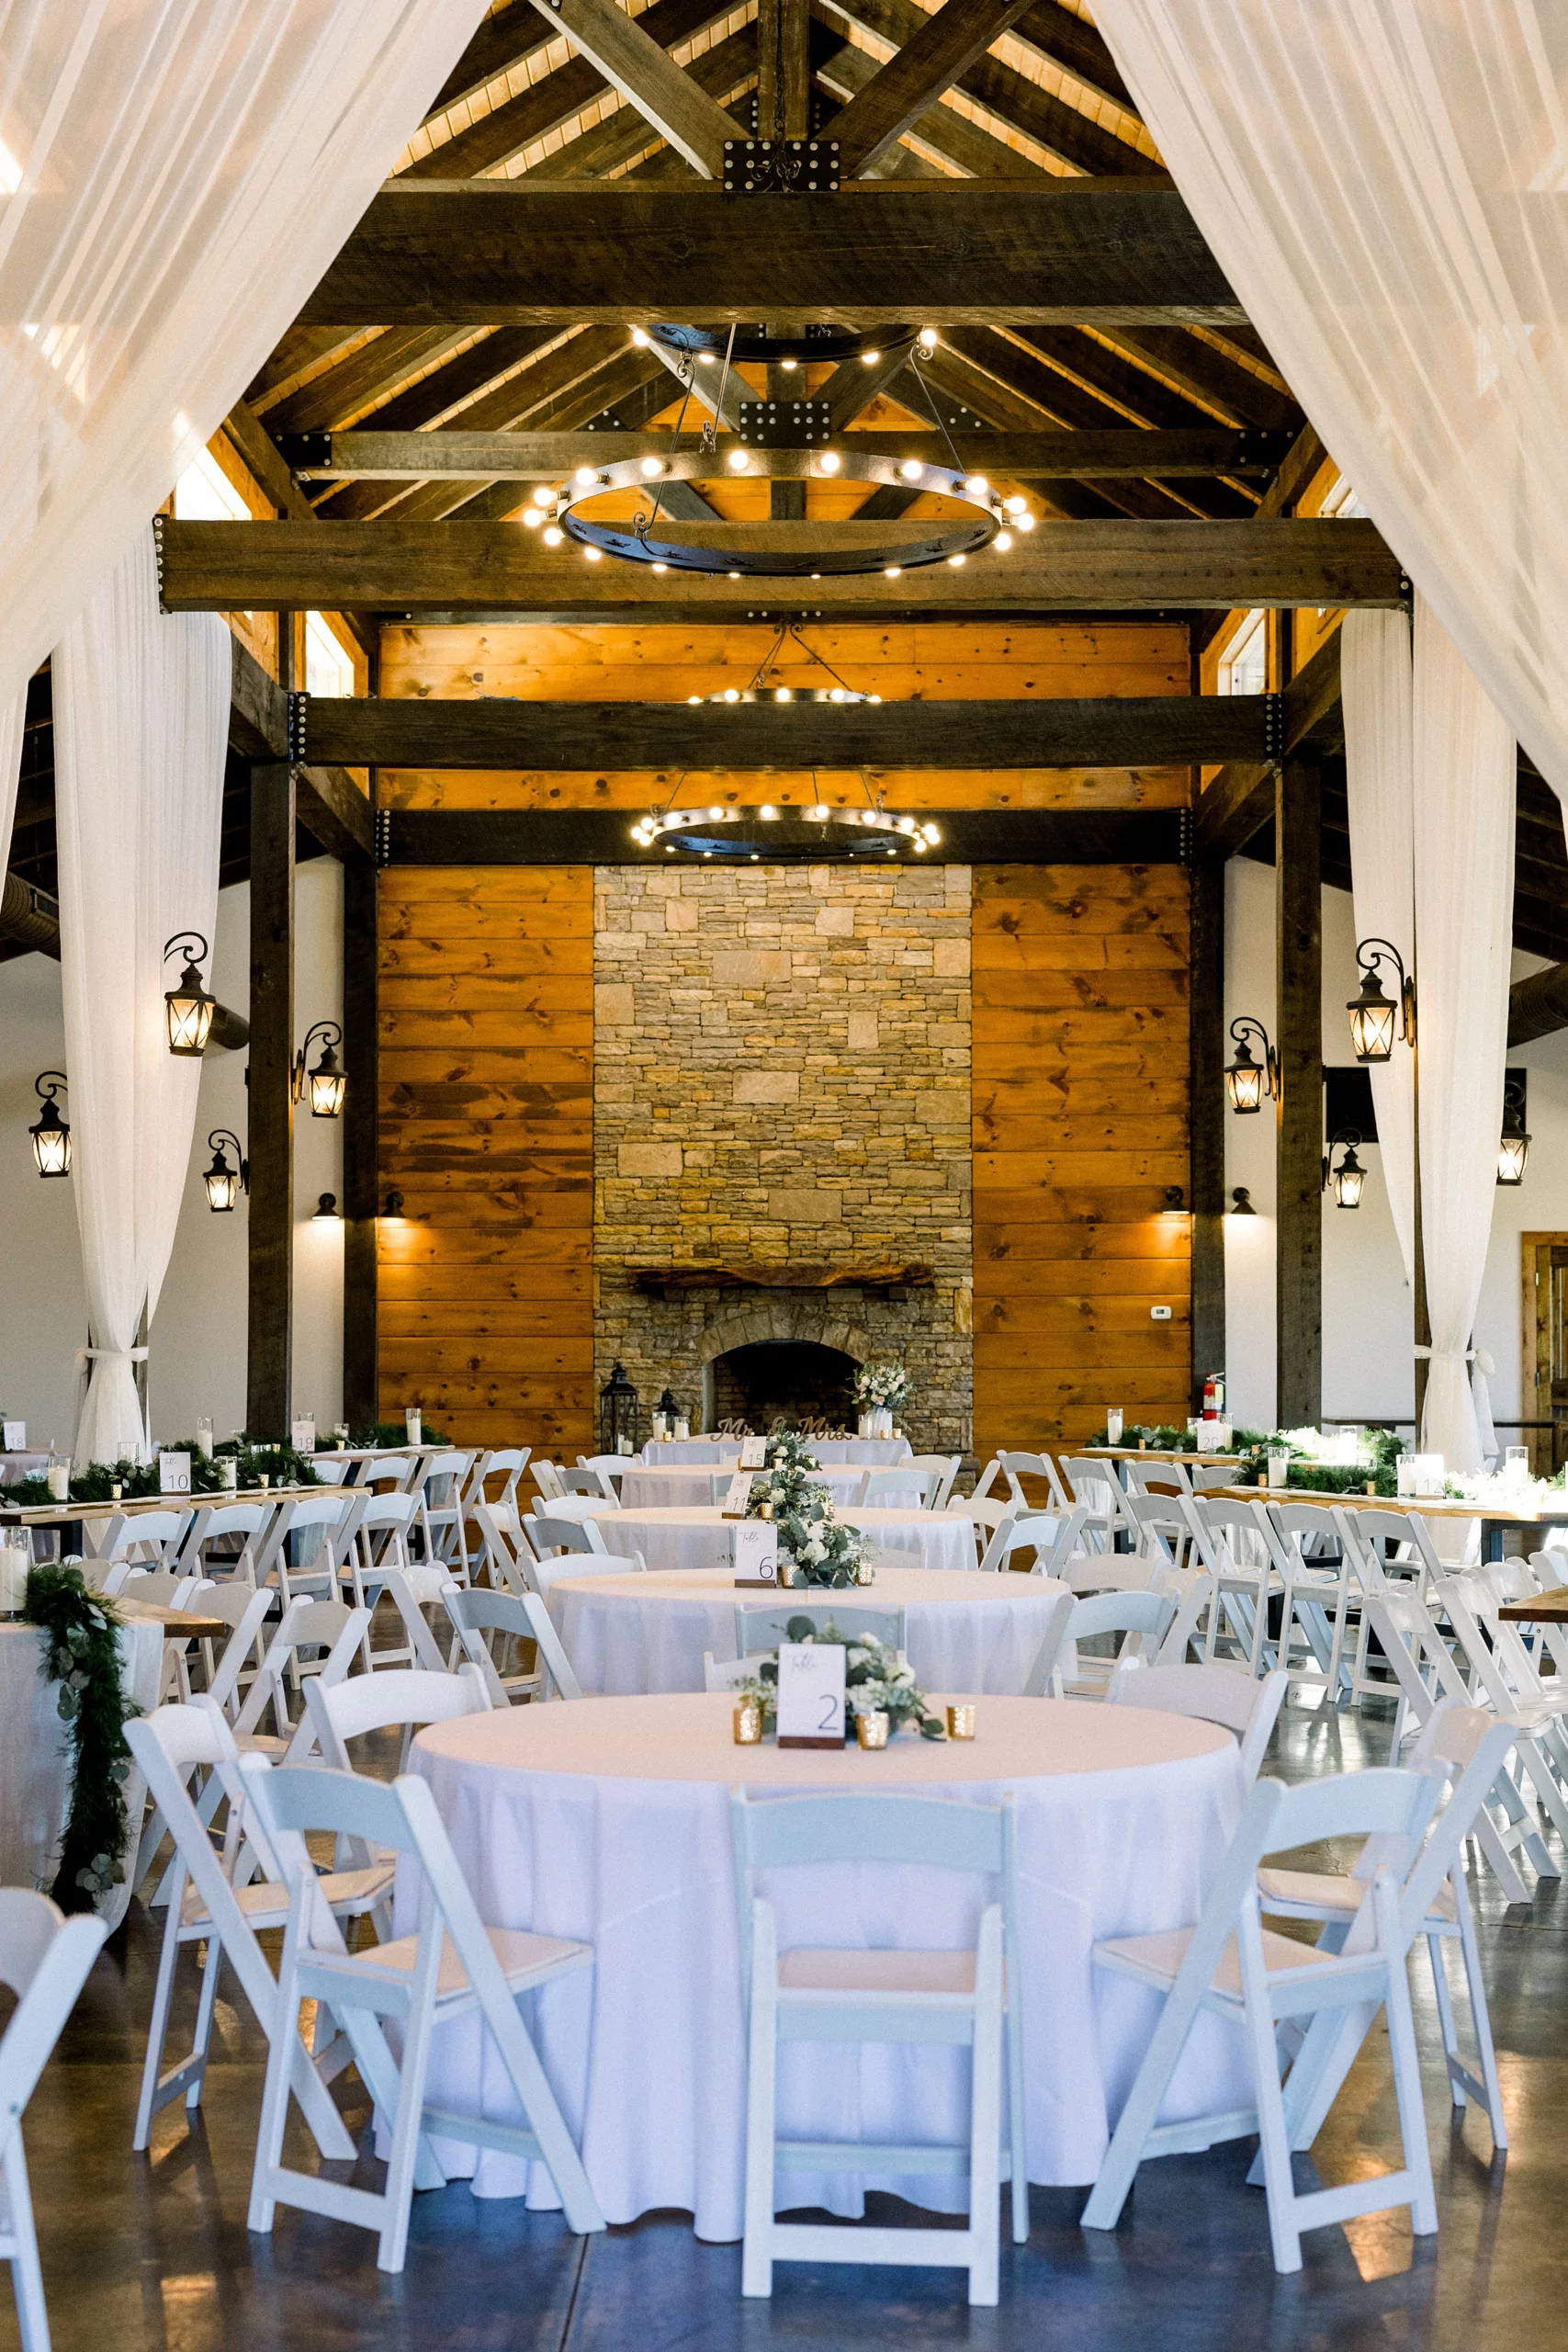 Details of a Barn wedding reception setup with white linen and chairs and a large stone fireplace at a Blue Mountain Vineyards Wedding